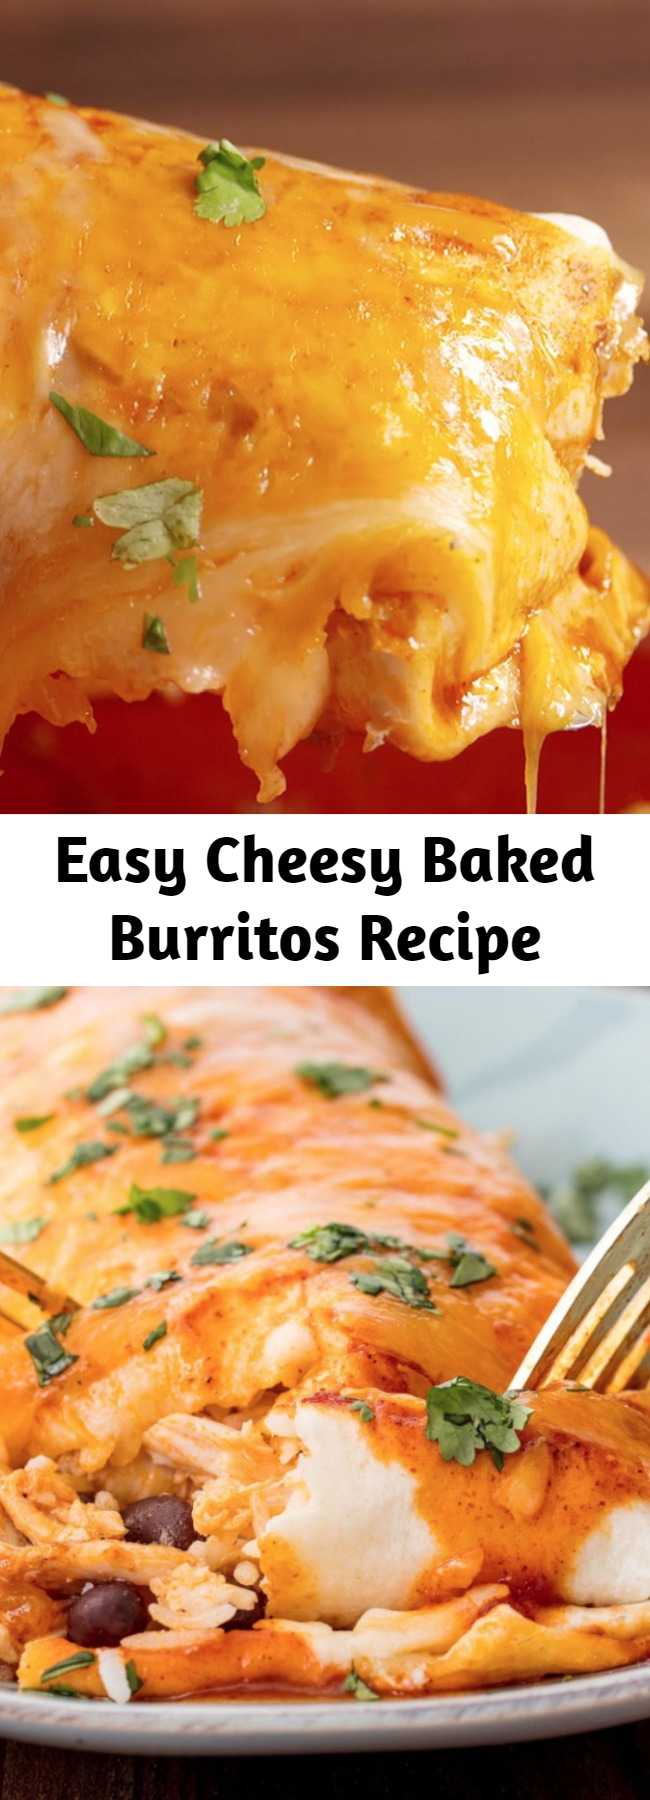 Easy Cheesy Baked Burritos Recipe - We're giving you the best possible reason to skip the line at Chipotle. Make these burritos ahead and put them in a baking dish to make for an entire group. #mexican #easy #recipe #cheesy #bakedburritos #burritos #familydinner #dinner